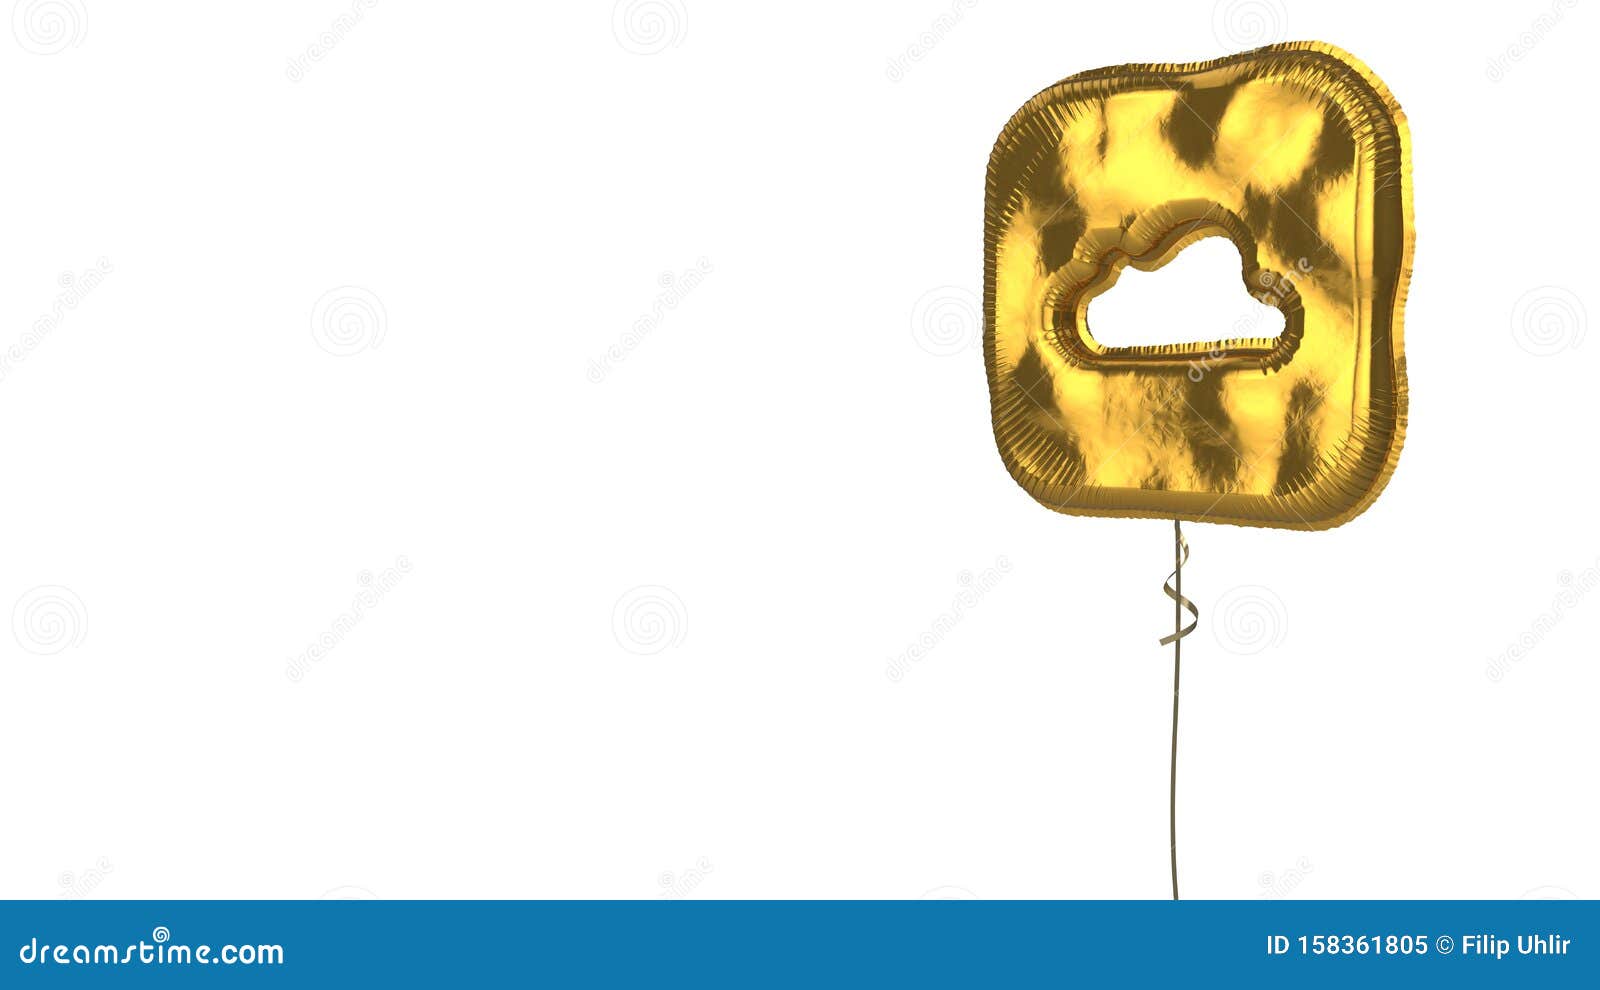 gold balloon icon of icloud drive app on white background